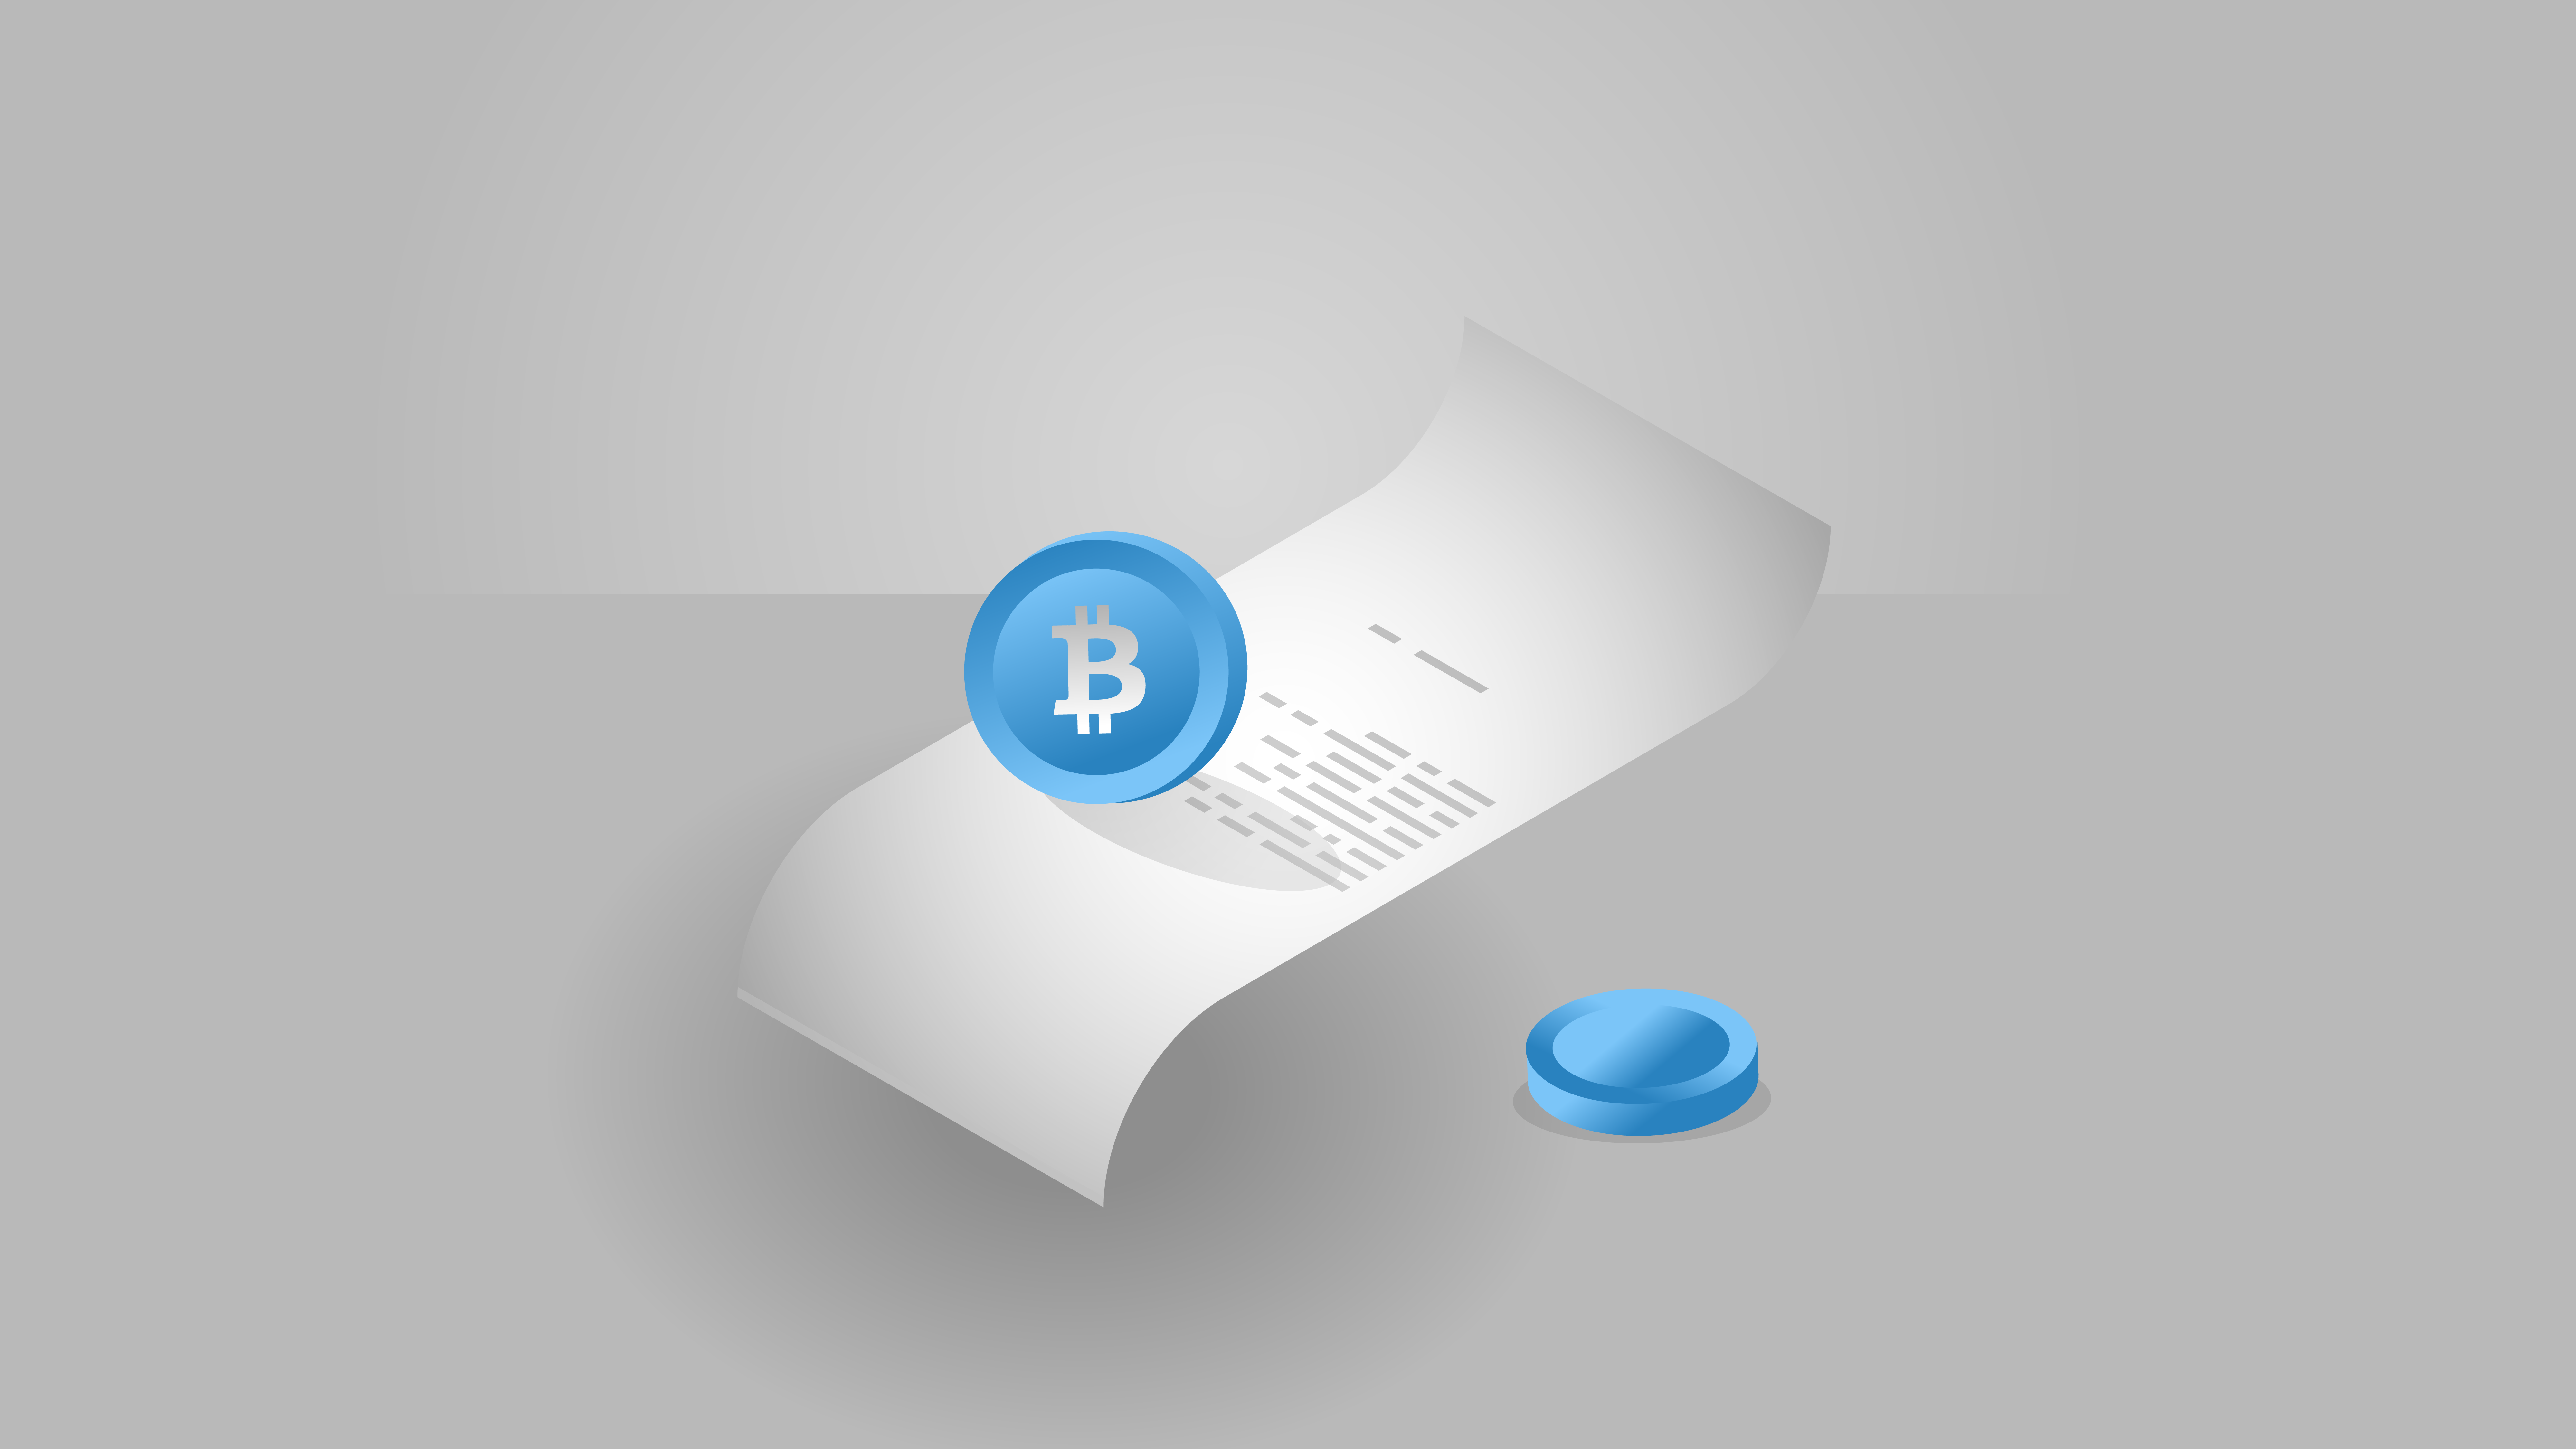 3 Things You Didn't Know About the Bitcoin White Paper